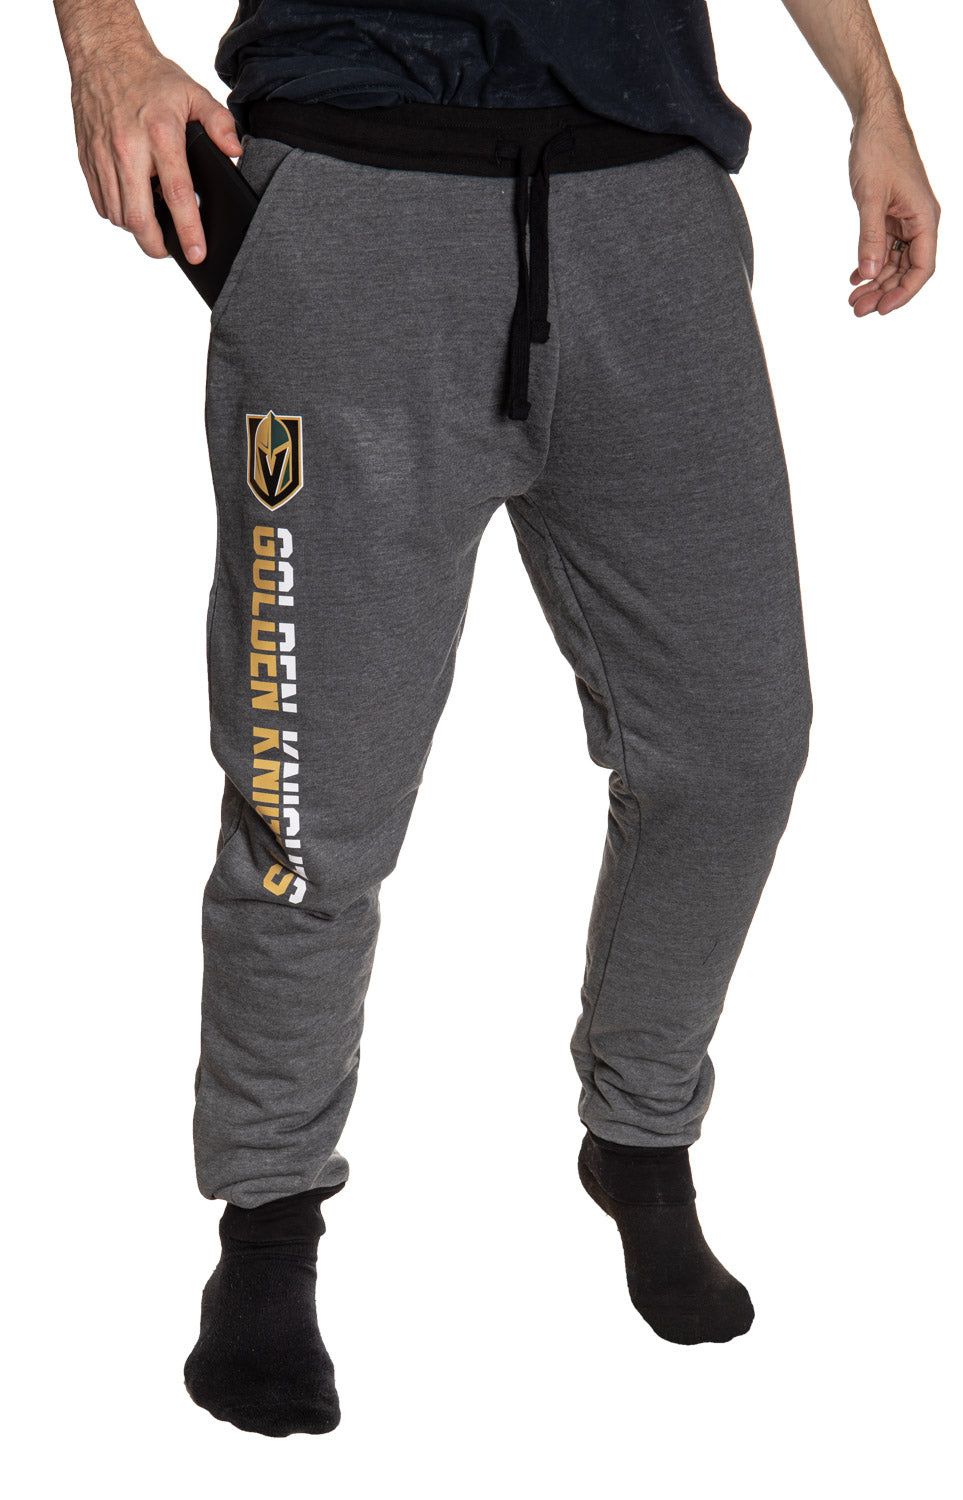 Vegas Golden Knights NHL Unisex Sherpa Lined Warm Sweatpants with Pockets